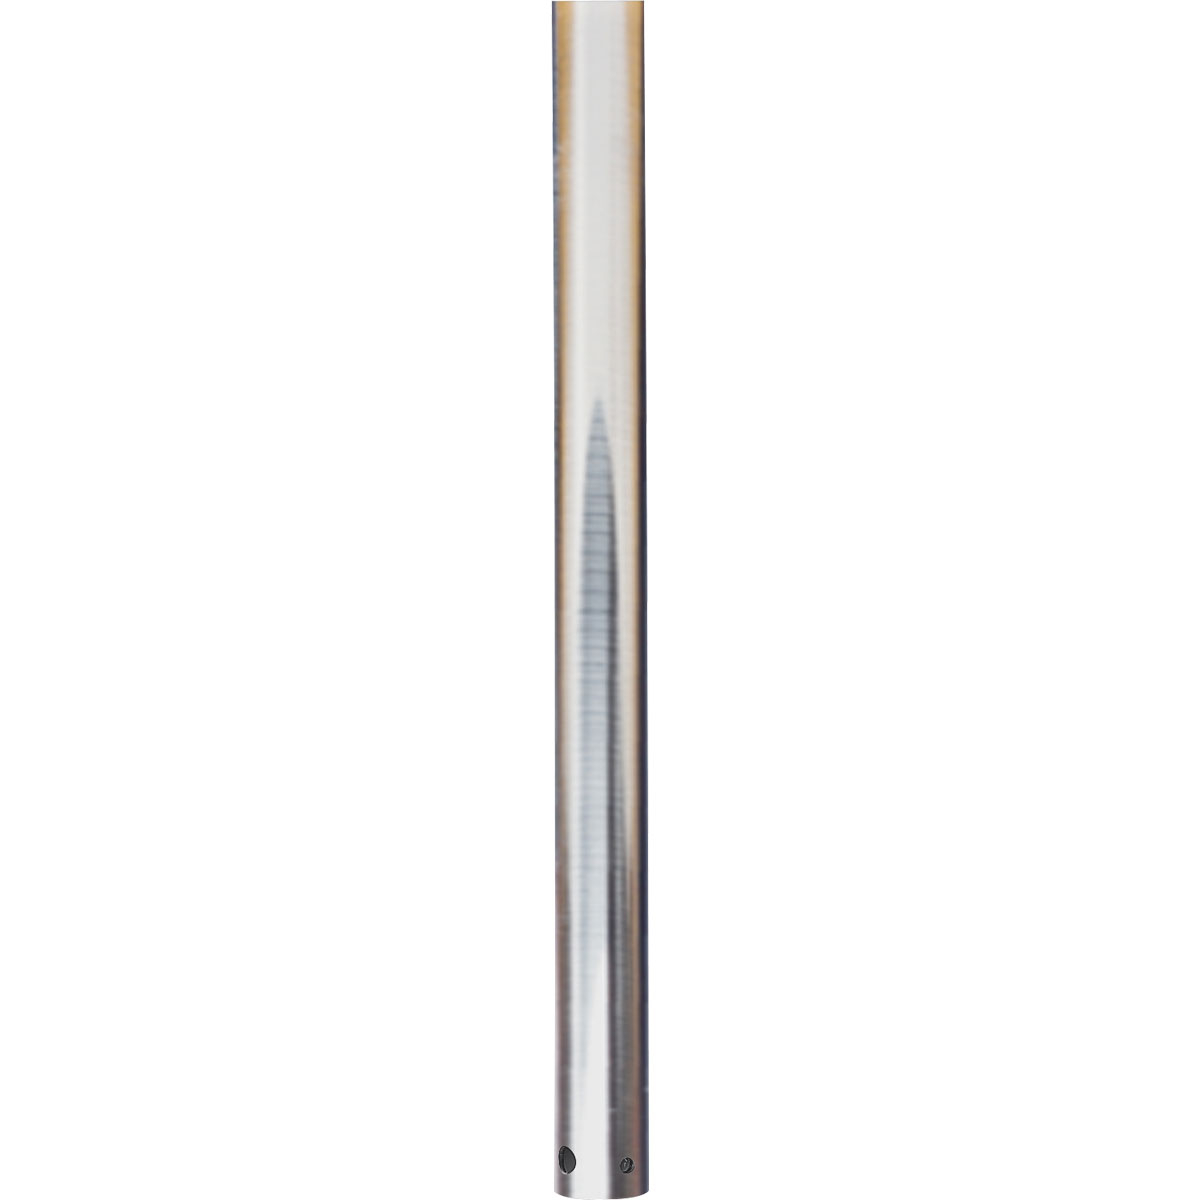 3/4 In. x 60 In. downrod for use with any Progress Lighting ceiling fan. Use of a fan downrod positions your ceiling fan at the optimal height for air circulation and provides the perfect solution for installation on high cathedral ceilings or in great rooms. Refer to the selection guide for recommended downrod lengths based upon your ceiling height. Brushed Nickel finish.